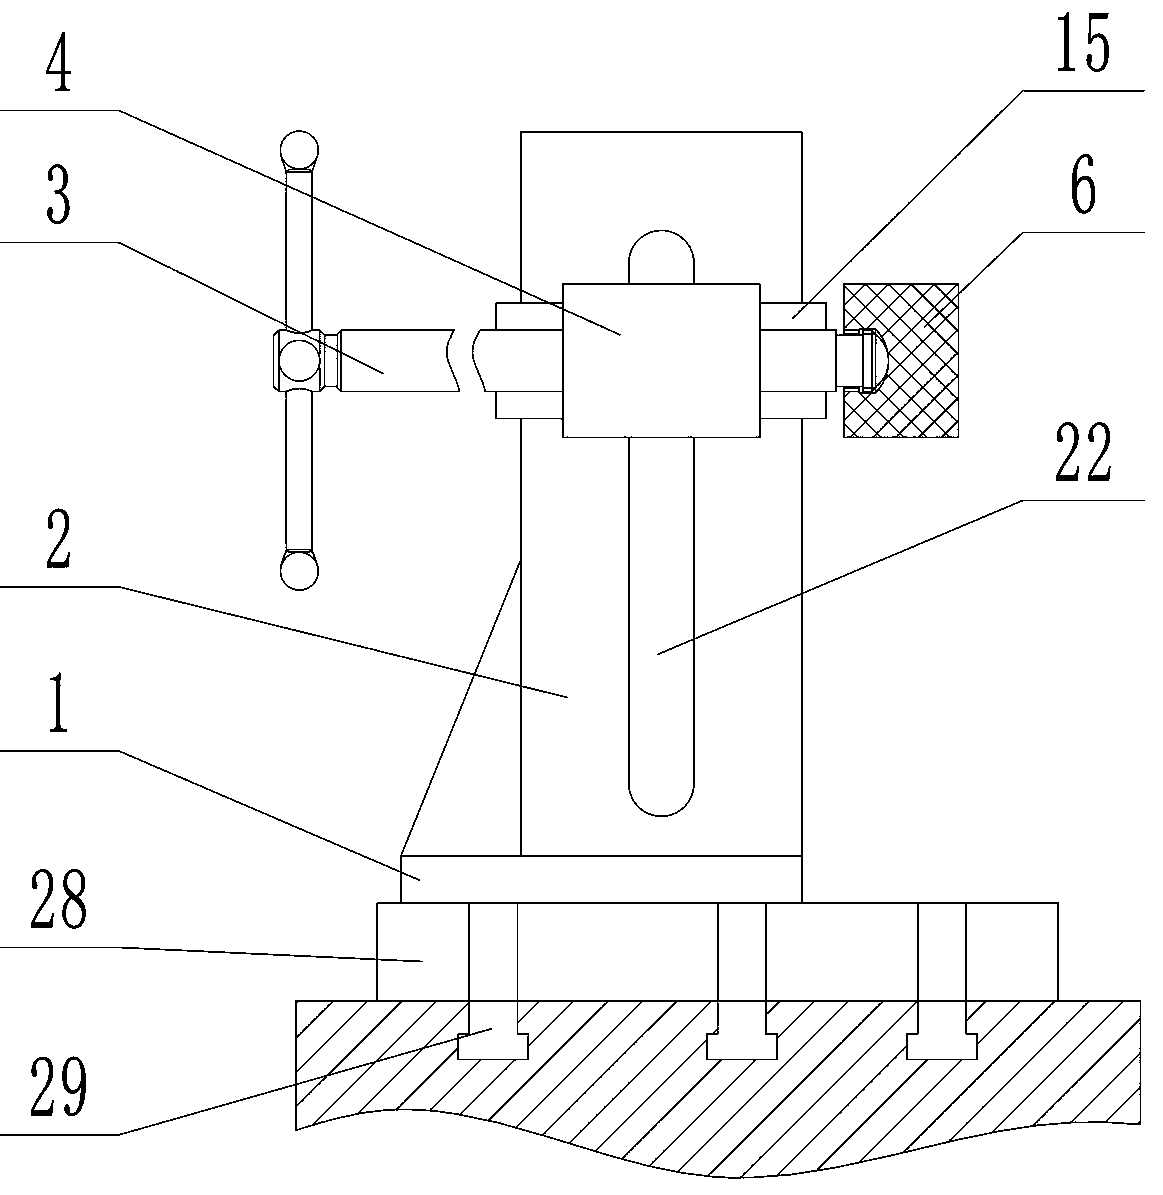 A self-adaptive adjustable fixture for processing aluminum products